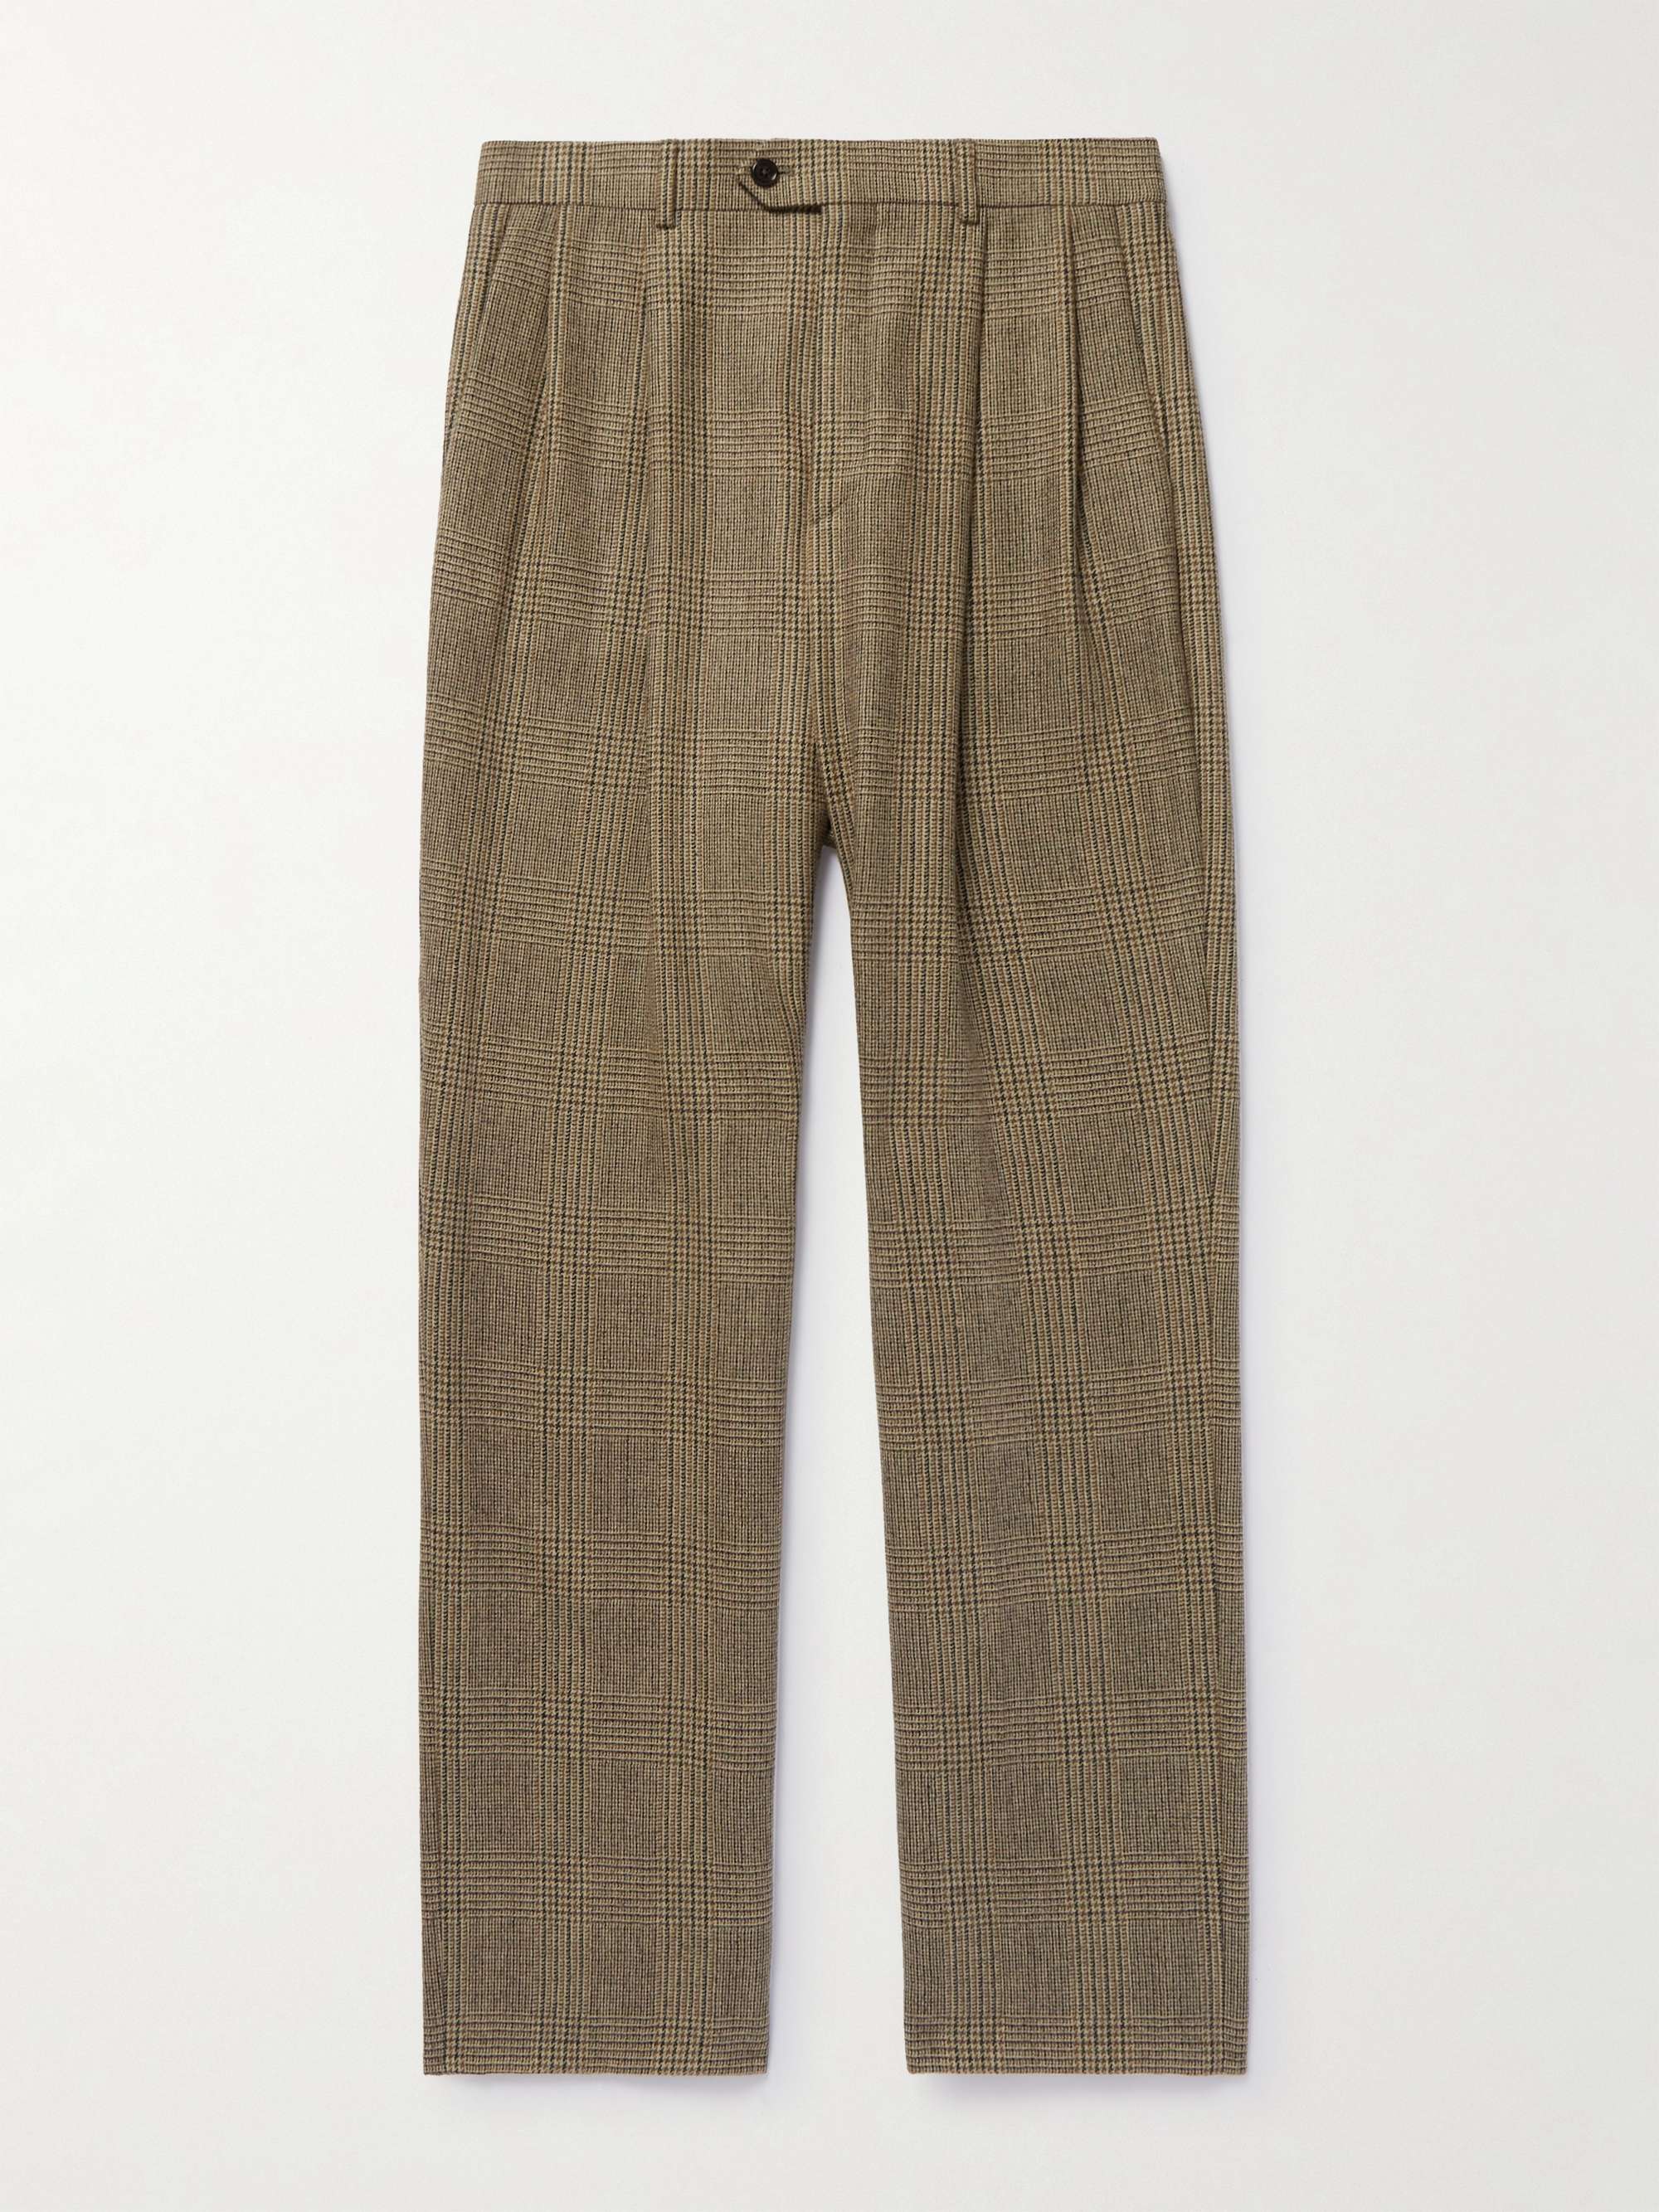 Celine High Waisted Trousers – Grey Suede